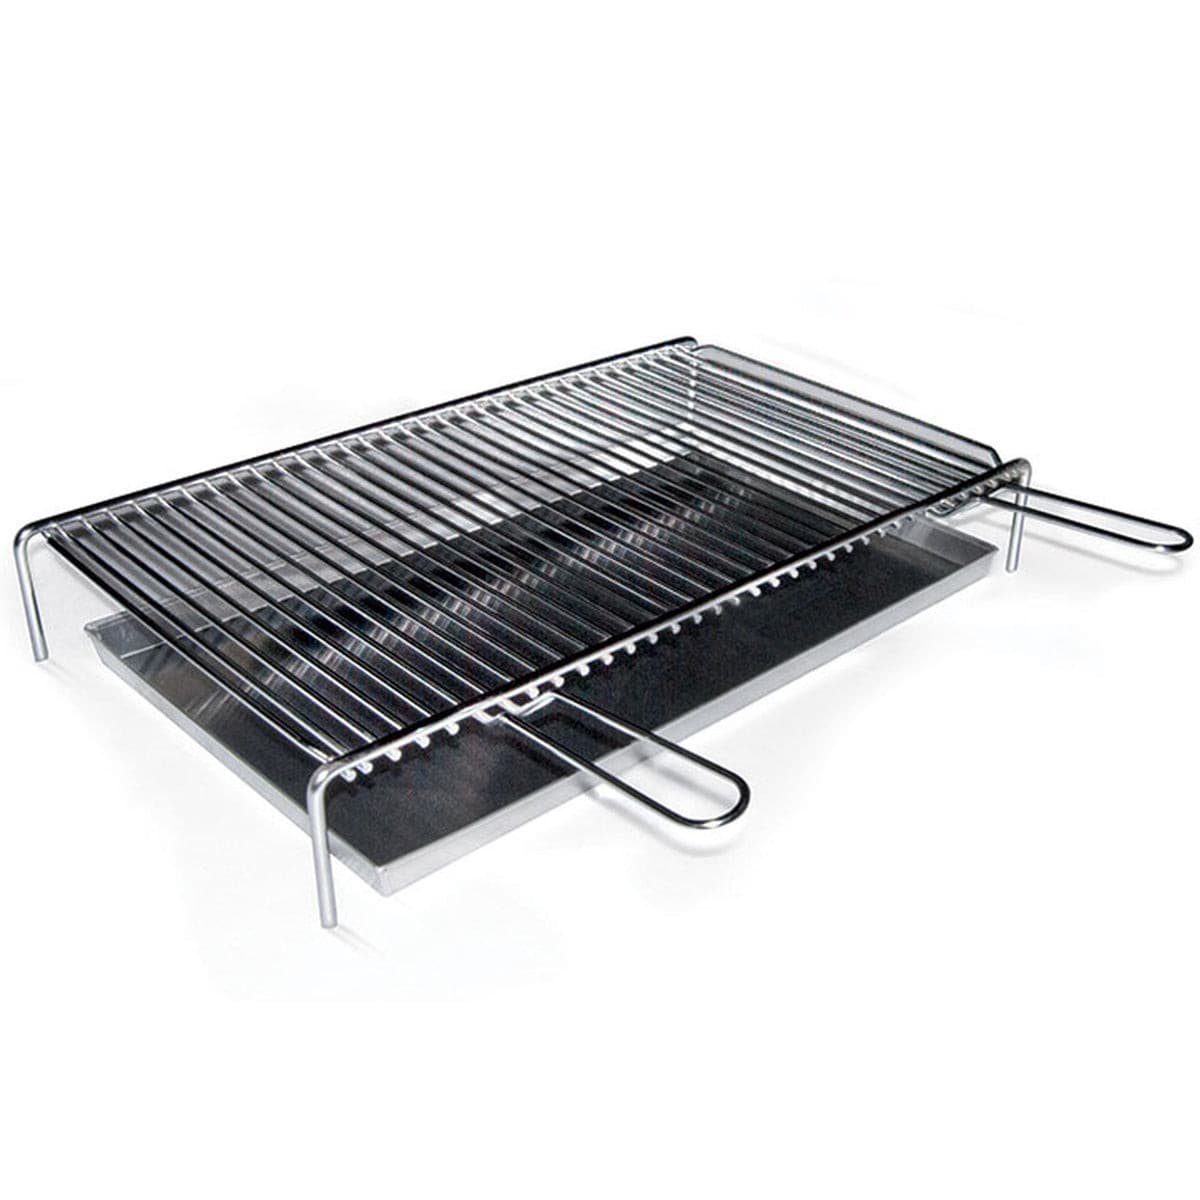 Fontana Stainless Steel Grill & Roasting Set - Vookoo Lifestyle